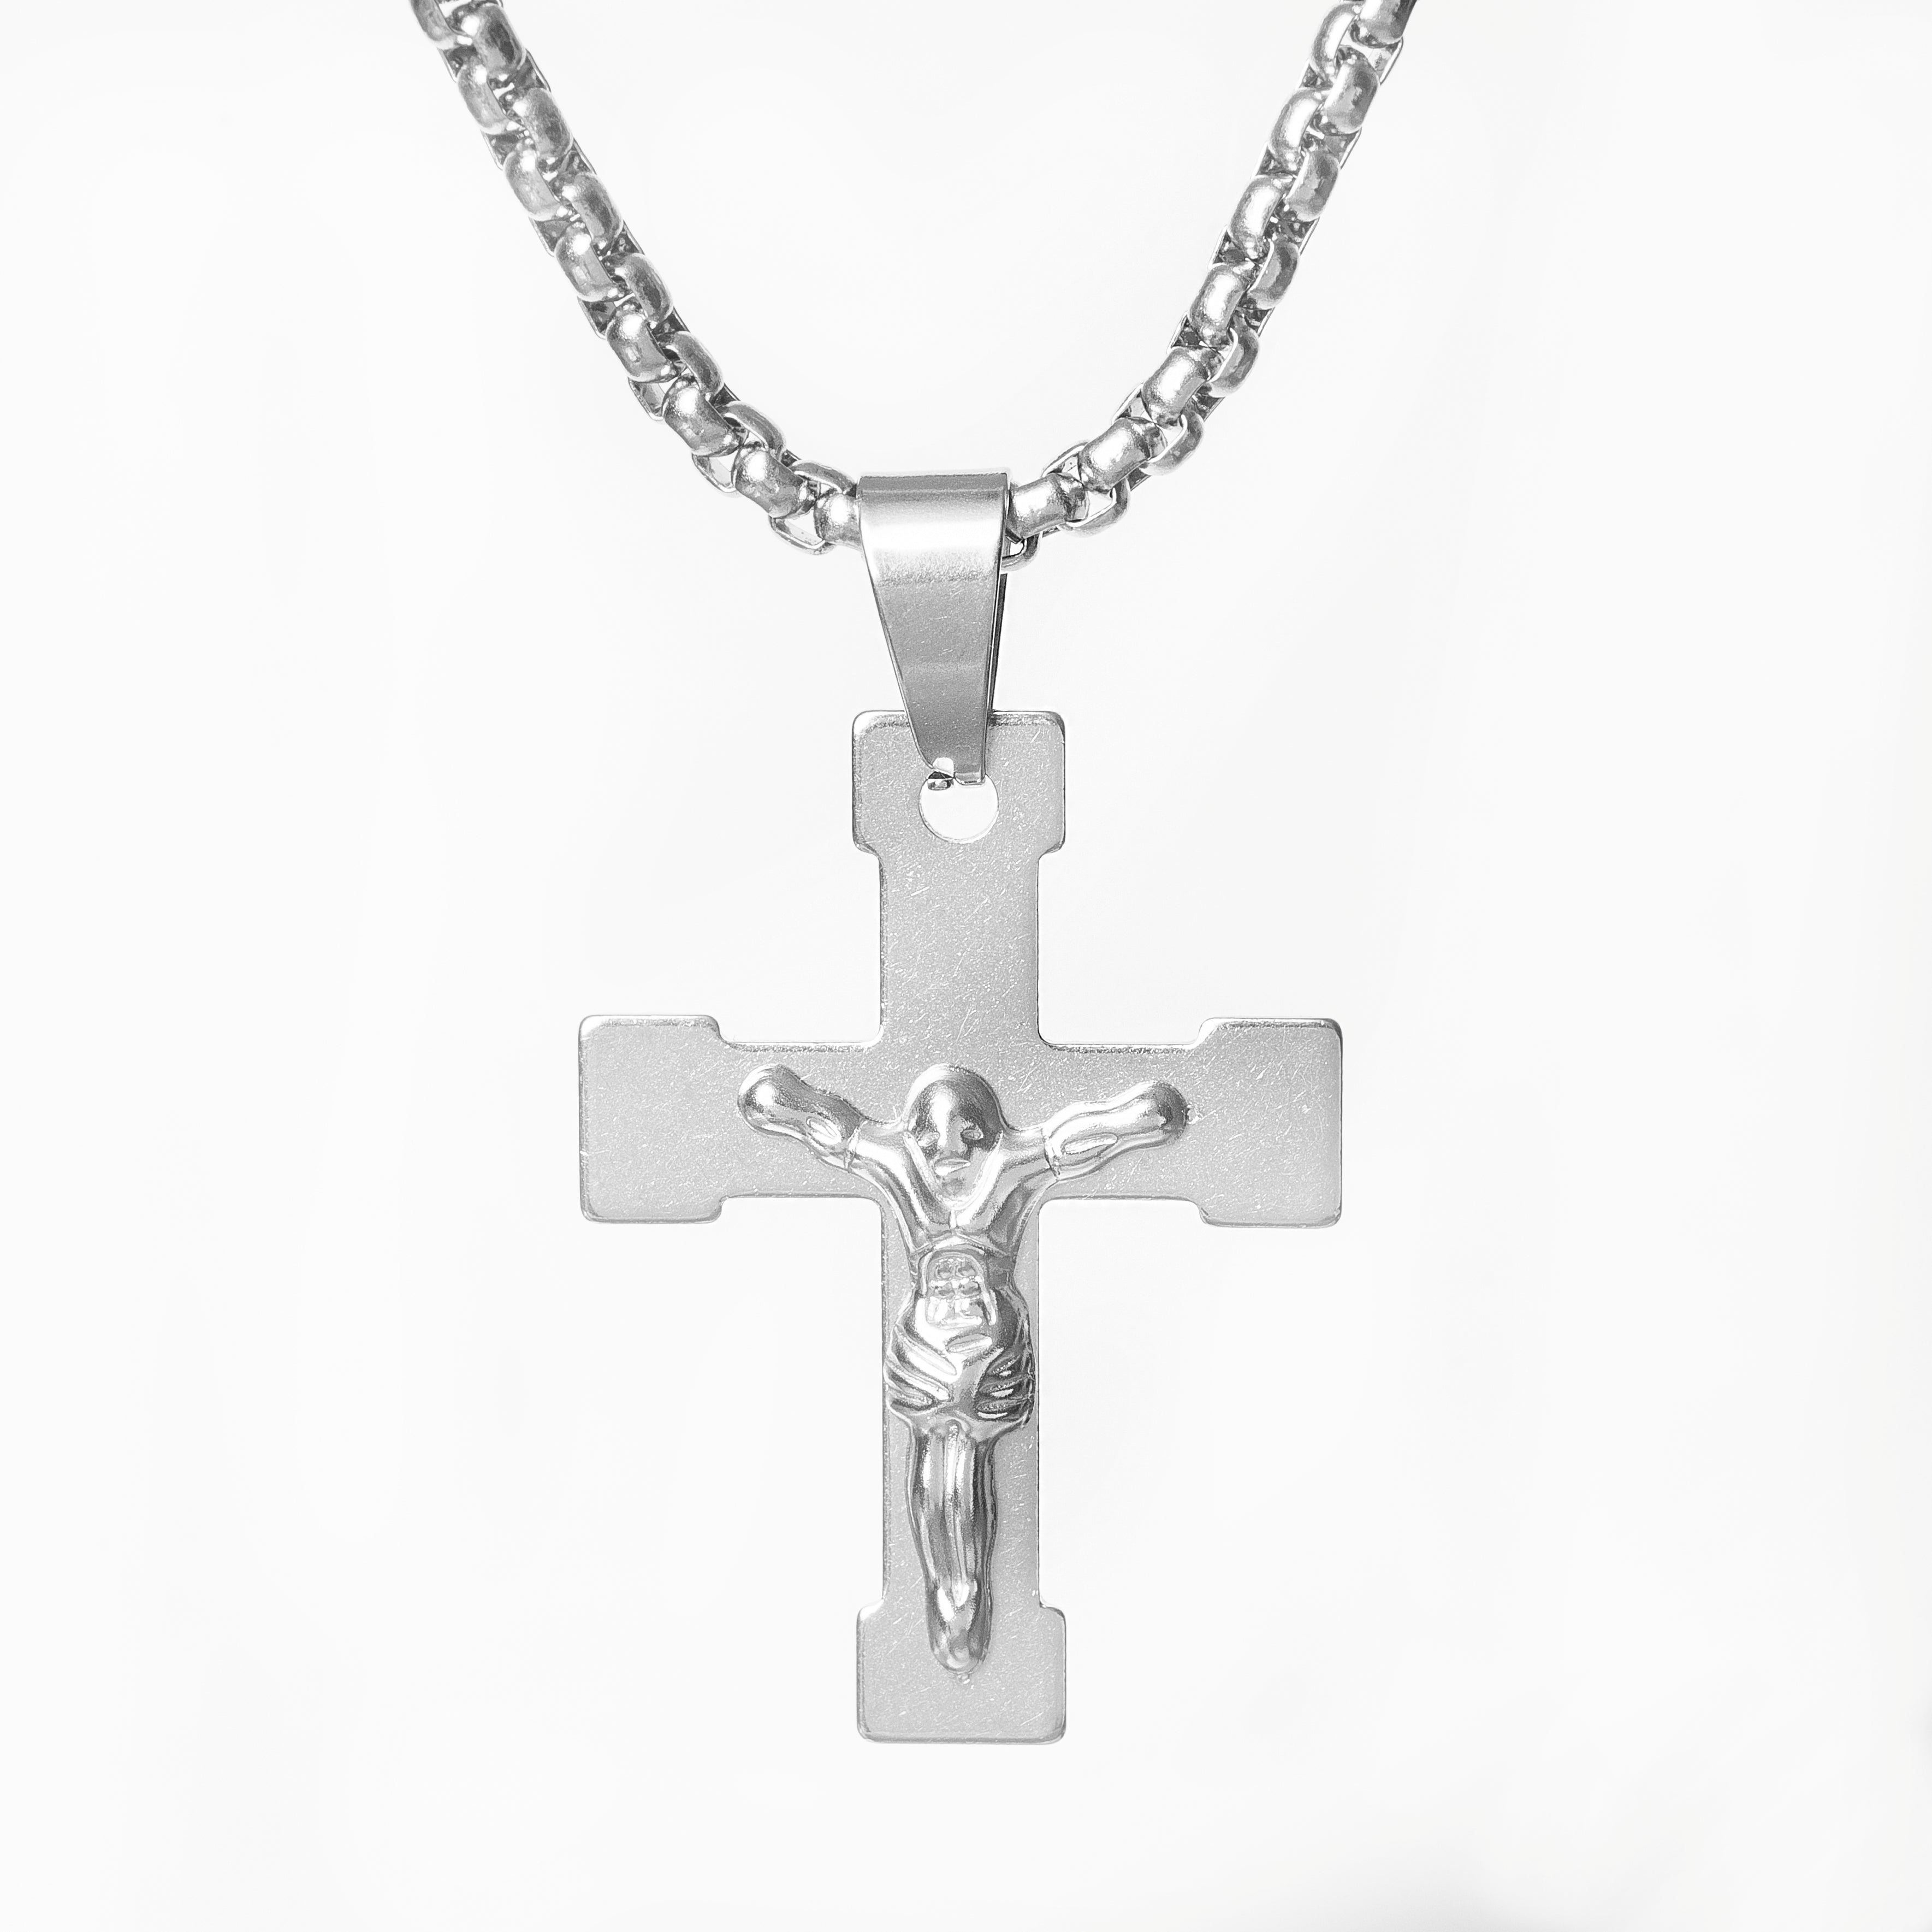 Manly Cross Silver Necklace